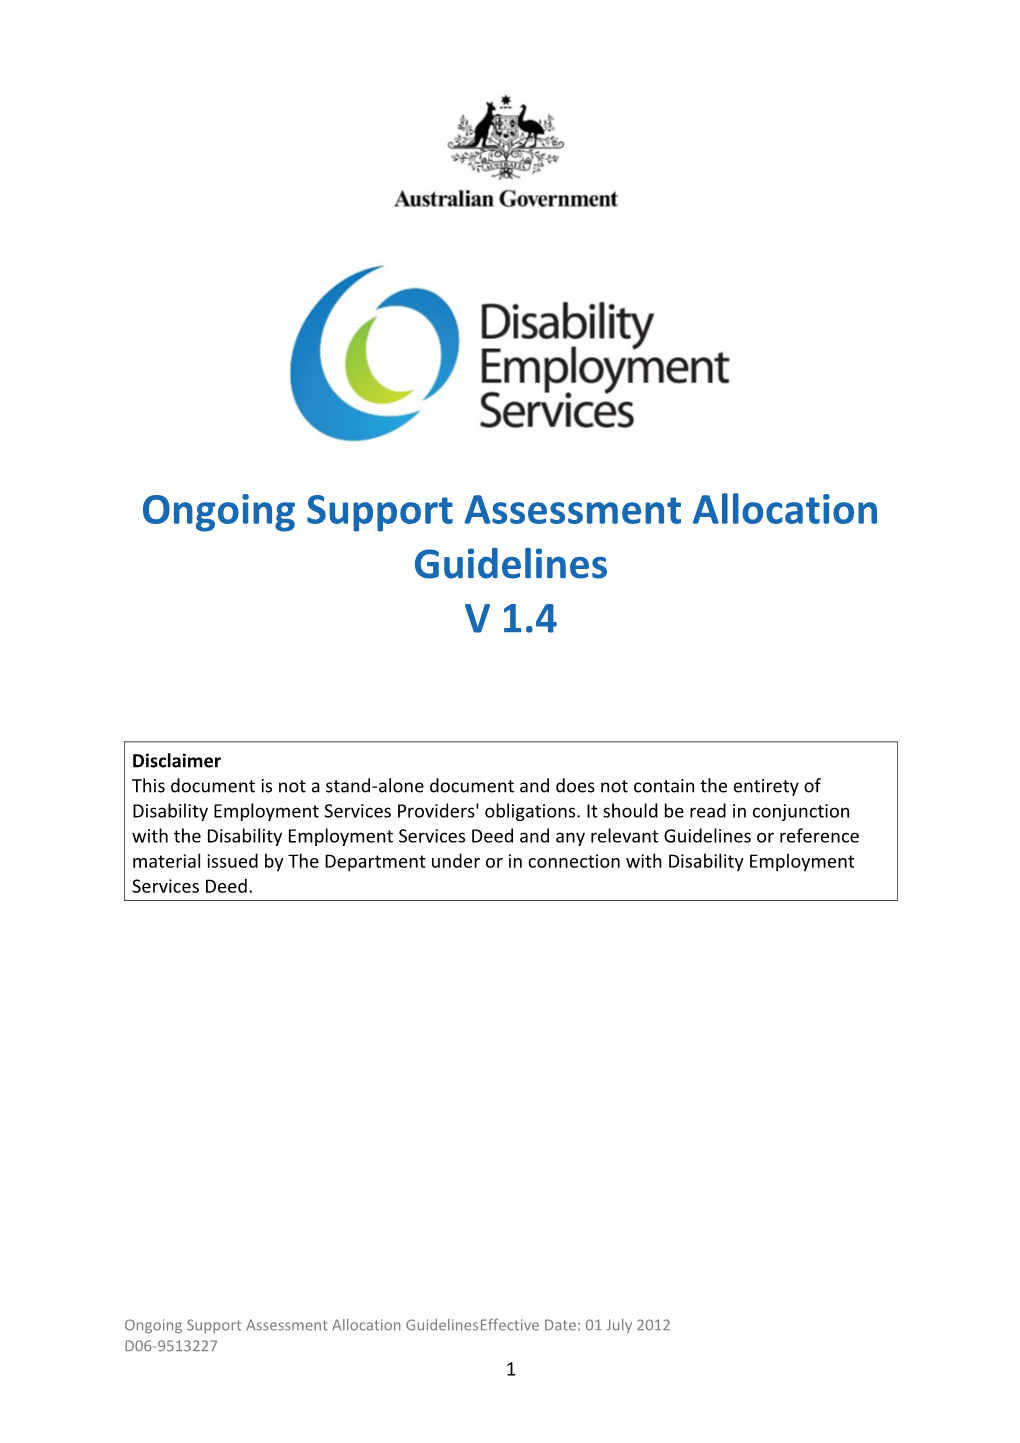 Ongoing Support Assessment Allocation Guidelines